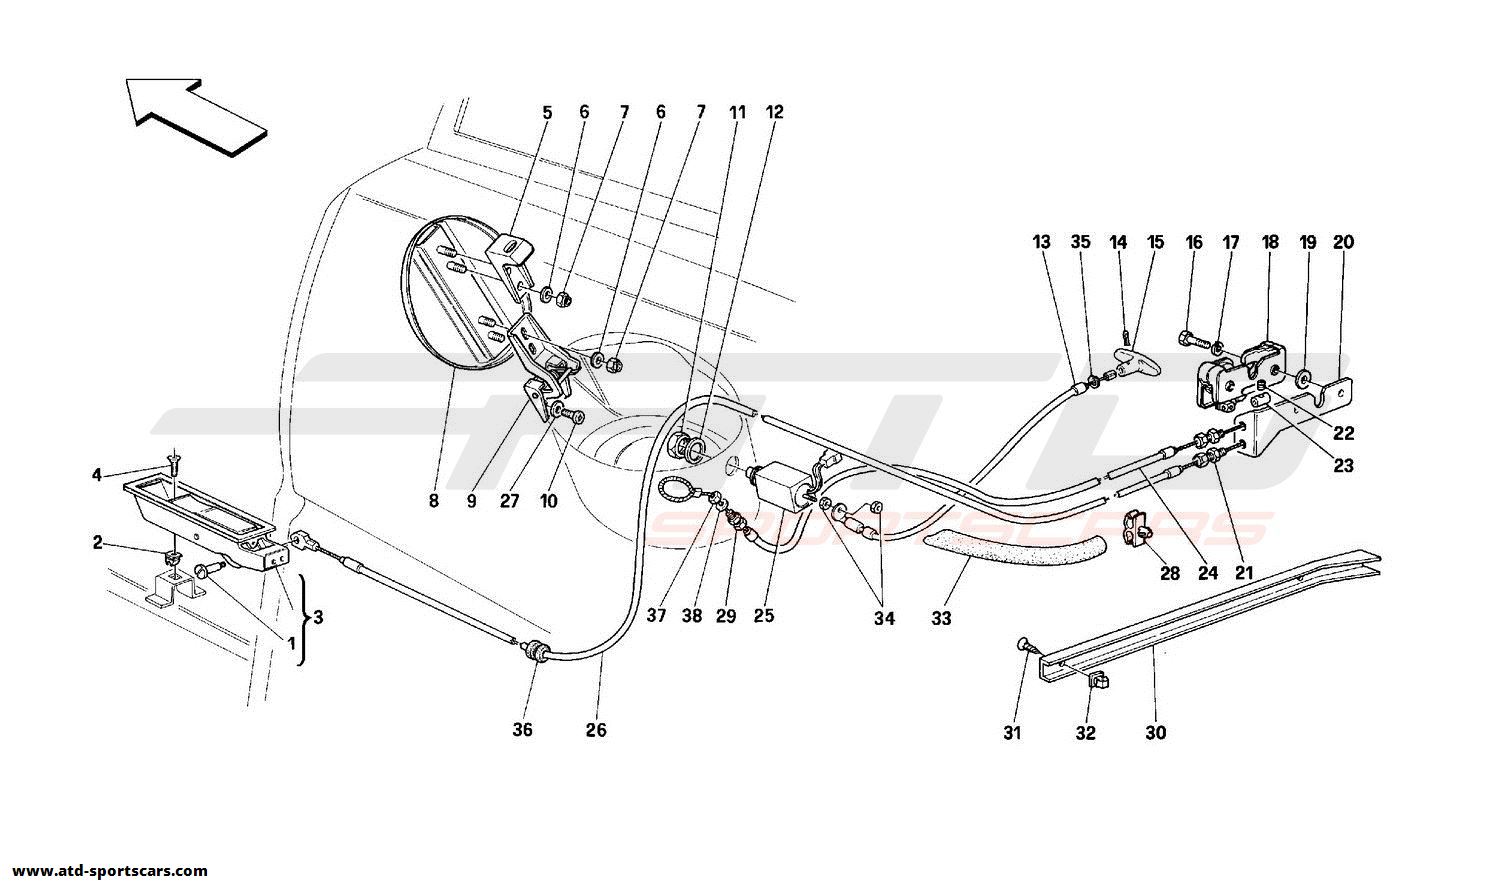 Ferrari 348 OPENING DEVICES FOR REAR HOOD AND GAS DOOR